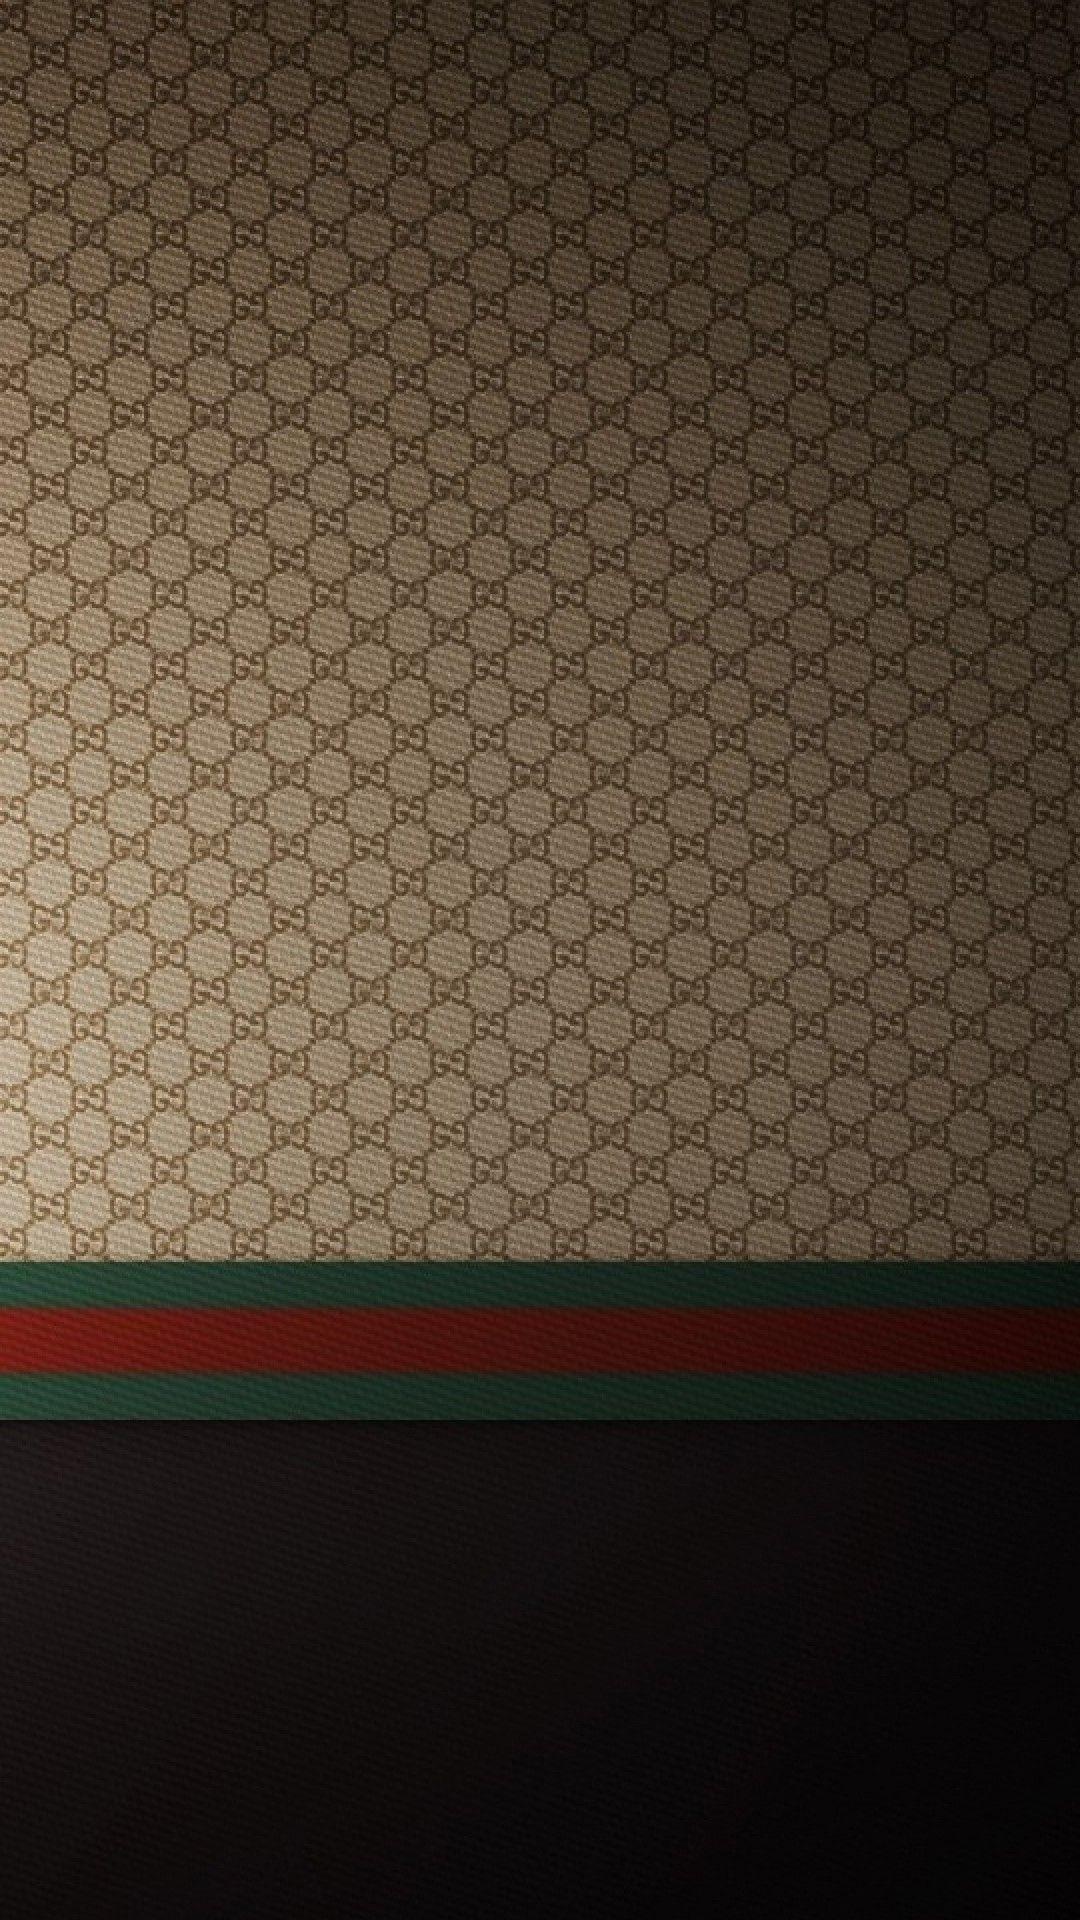 Gucci: The famous fashion house, Florence, Italy, The renowned pattern and logo. 1080x1920 Full HD Wallpaper.